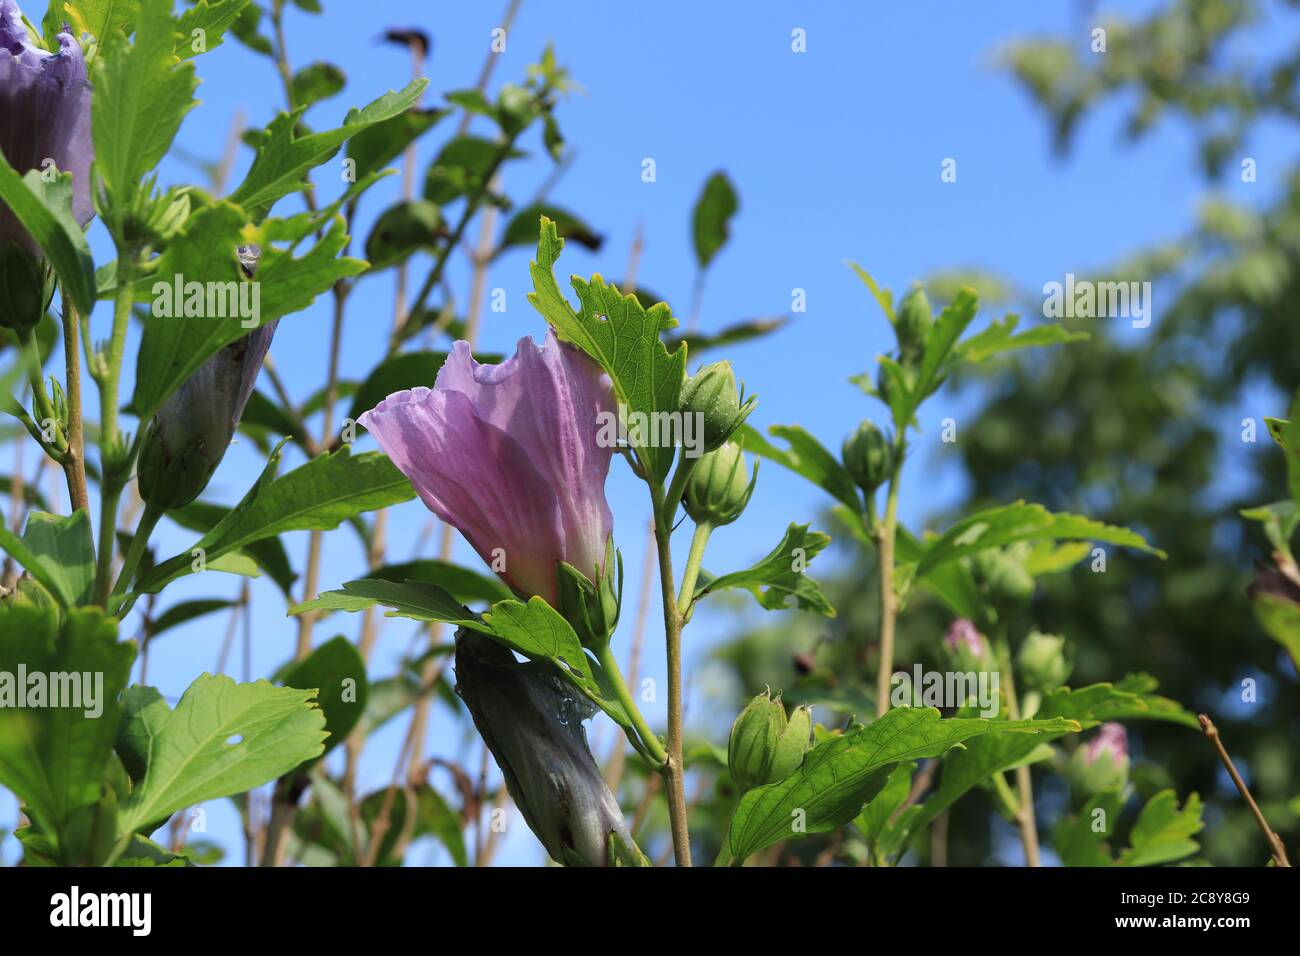 A pink hibiscus bud and a blue sky in a blurred background Stock Photo